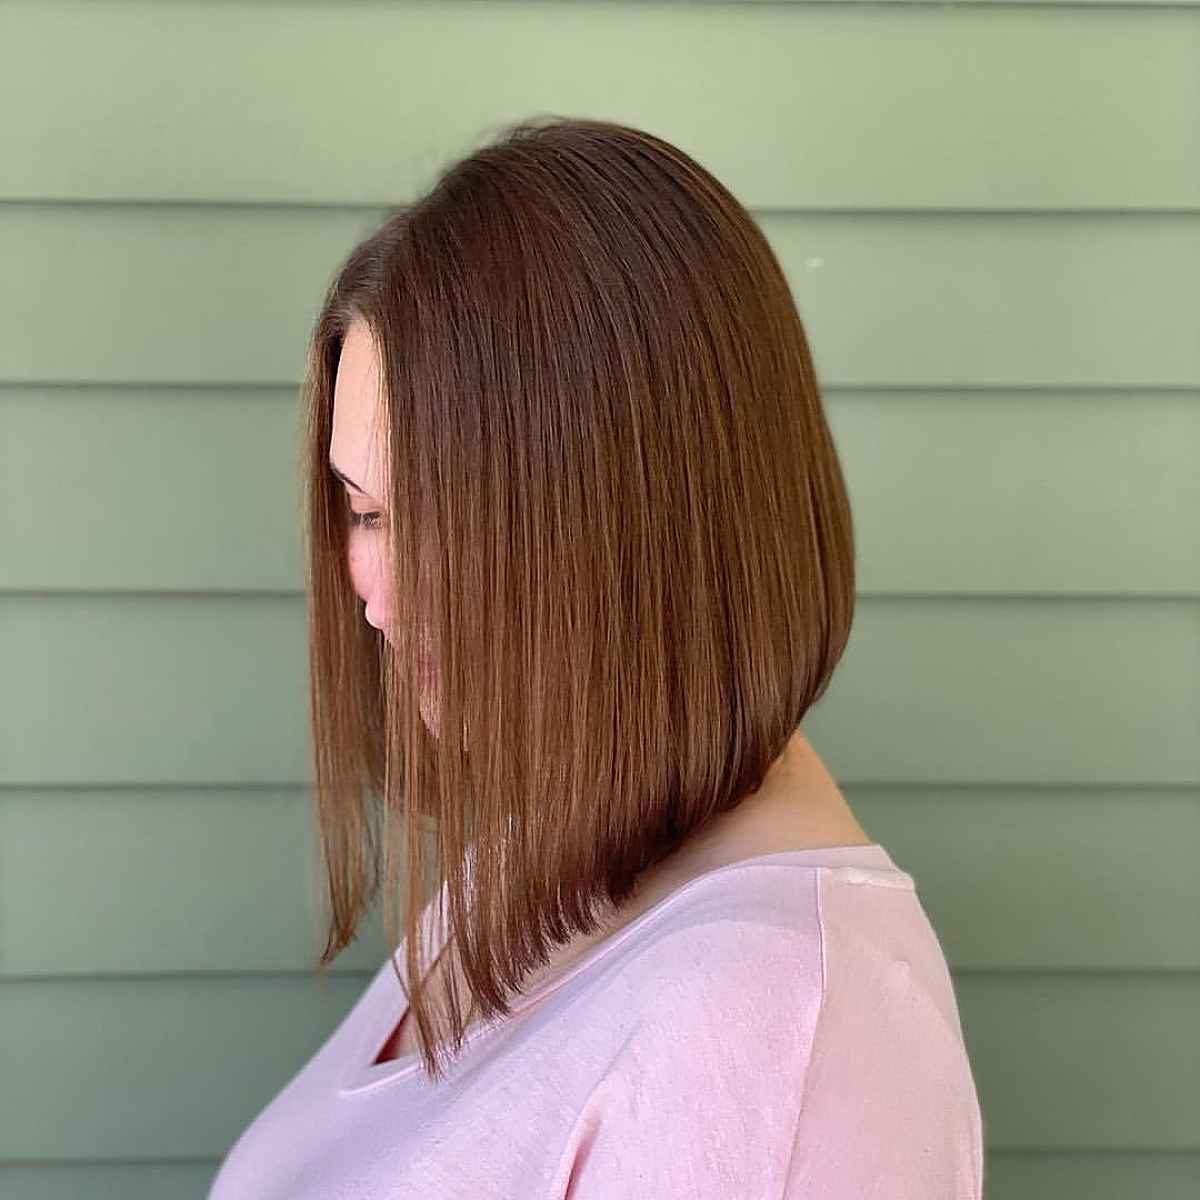 19 Flattering Long Bob Haircuts for Women with Full and Round Faces